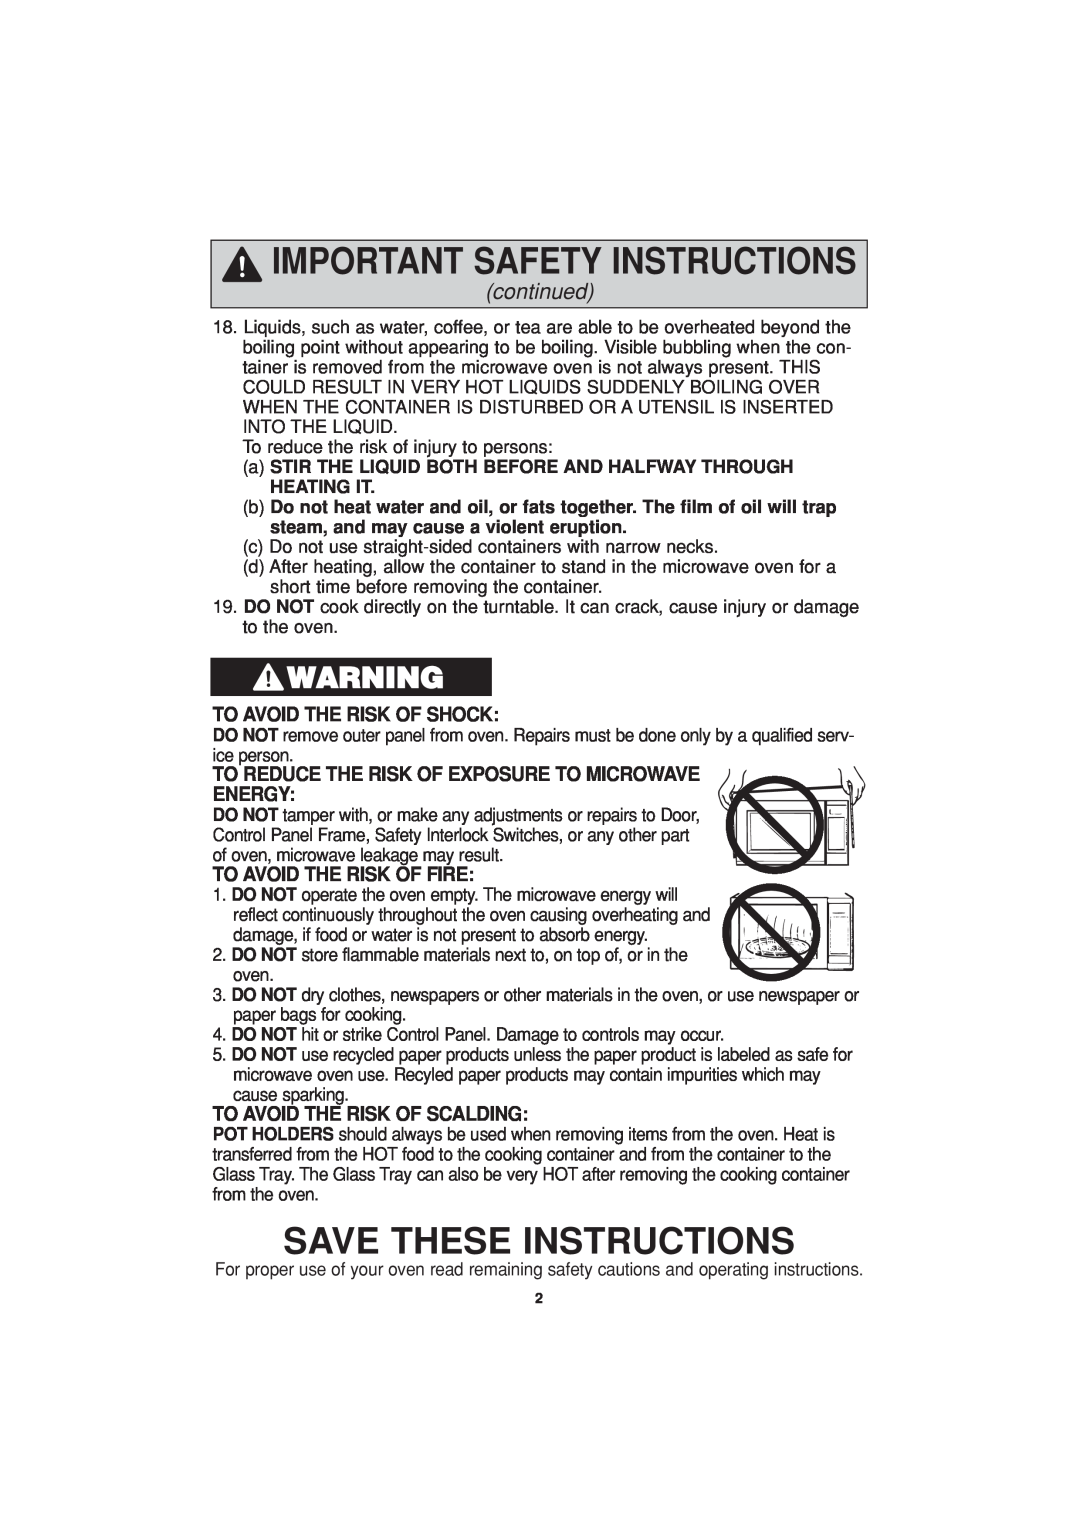 Panasonic NN-H644, NN-H634 Save These Instructions, continued, To Avoid The Risk Of Shock, To Avoid The Risk Of Fire 